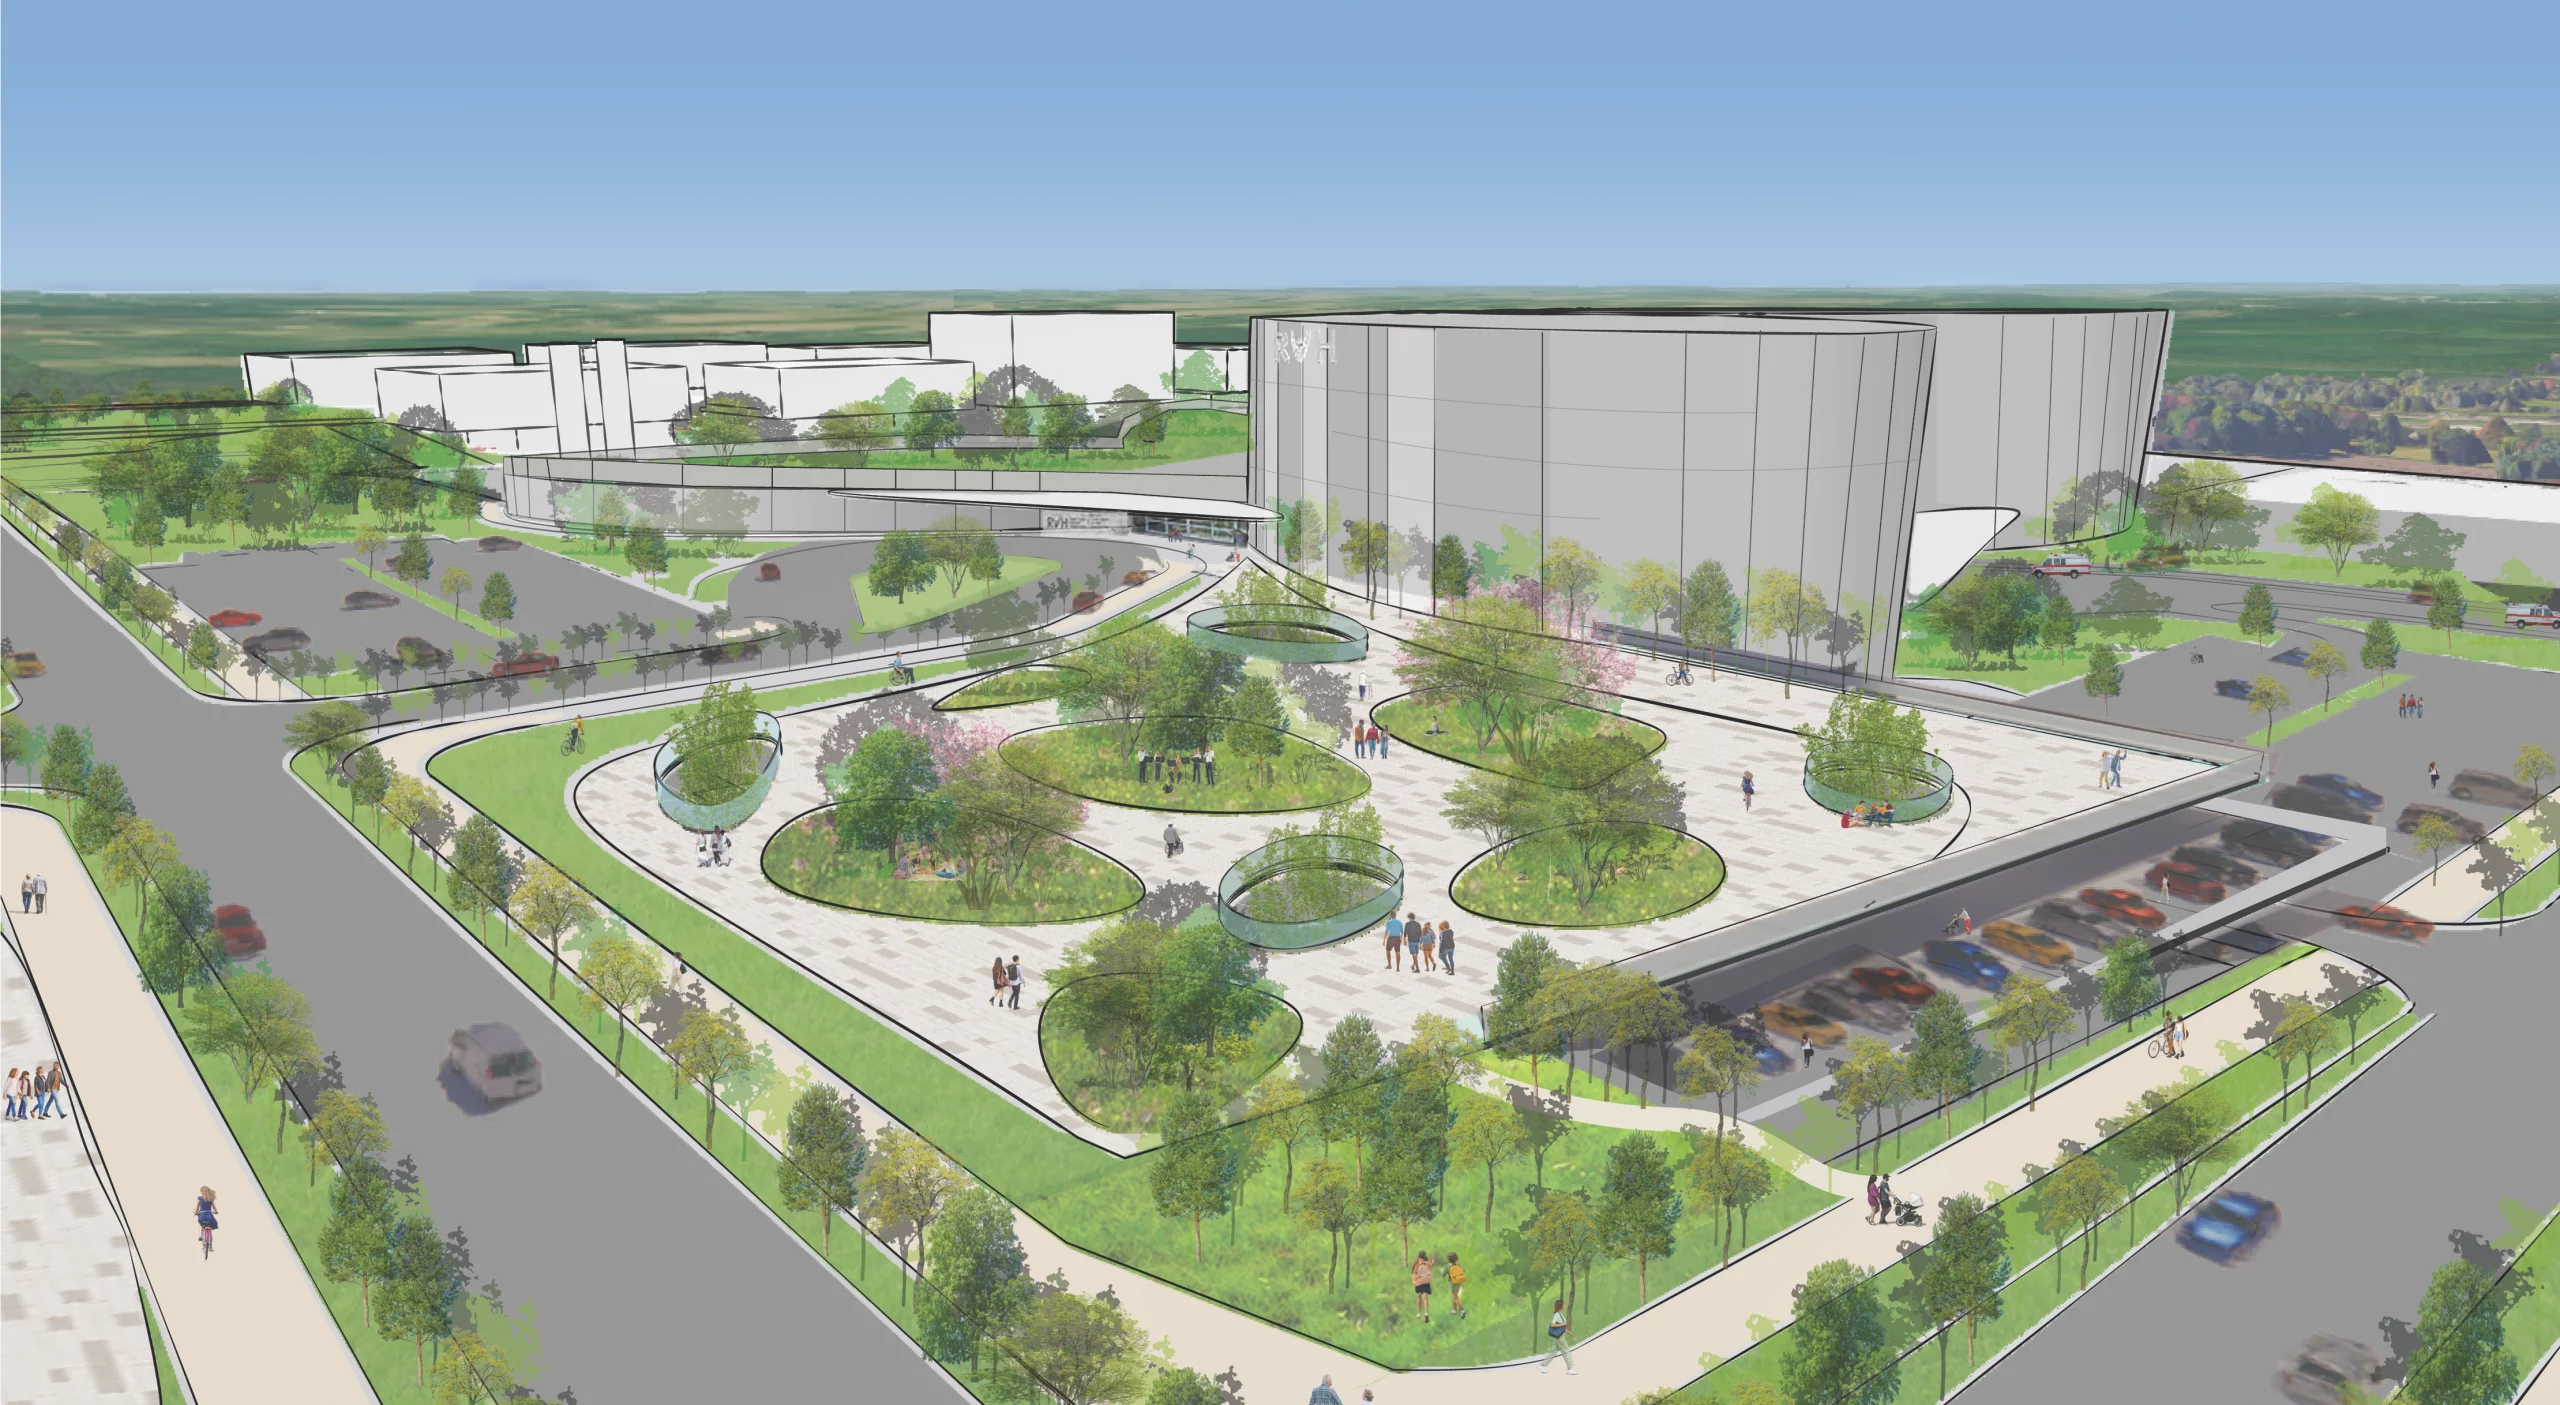 An artist’s rendering shows buildings atop a slight hill, depicting a possible design for RVH’s South Campus. A pond and a walkway in the foreground encourage a symbiotic relationship between the hospital and outdoor space.